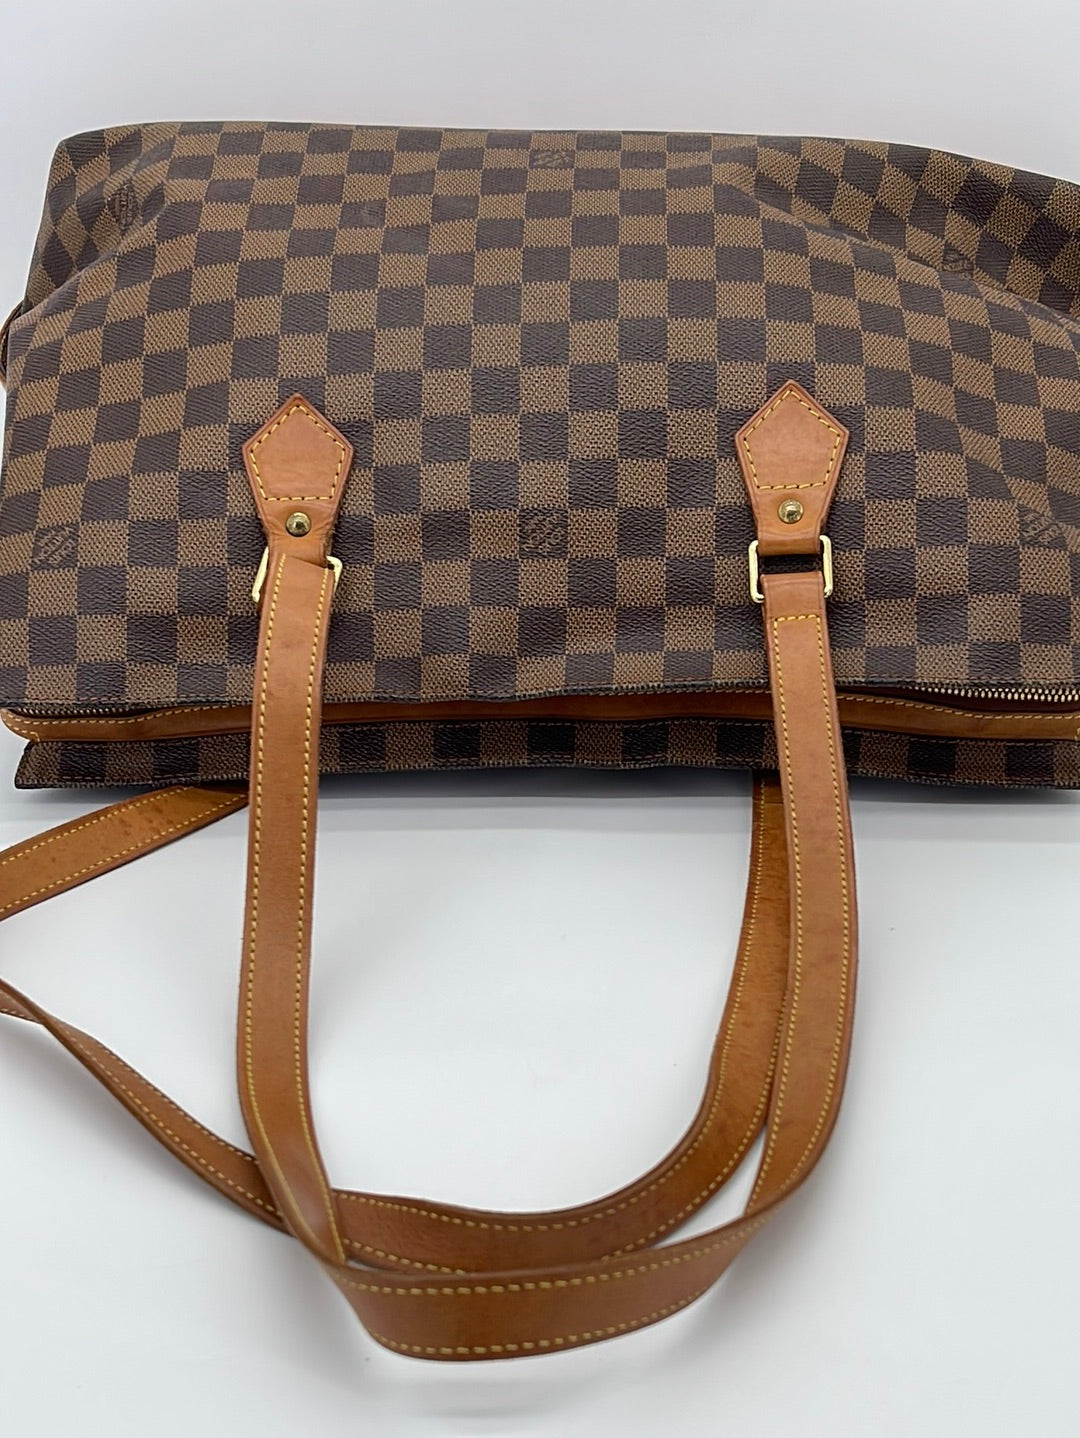 Pre-Owned Louis Vuitton Damier Ebene Favorite PM – Bremer Jewelry